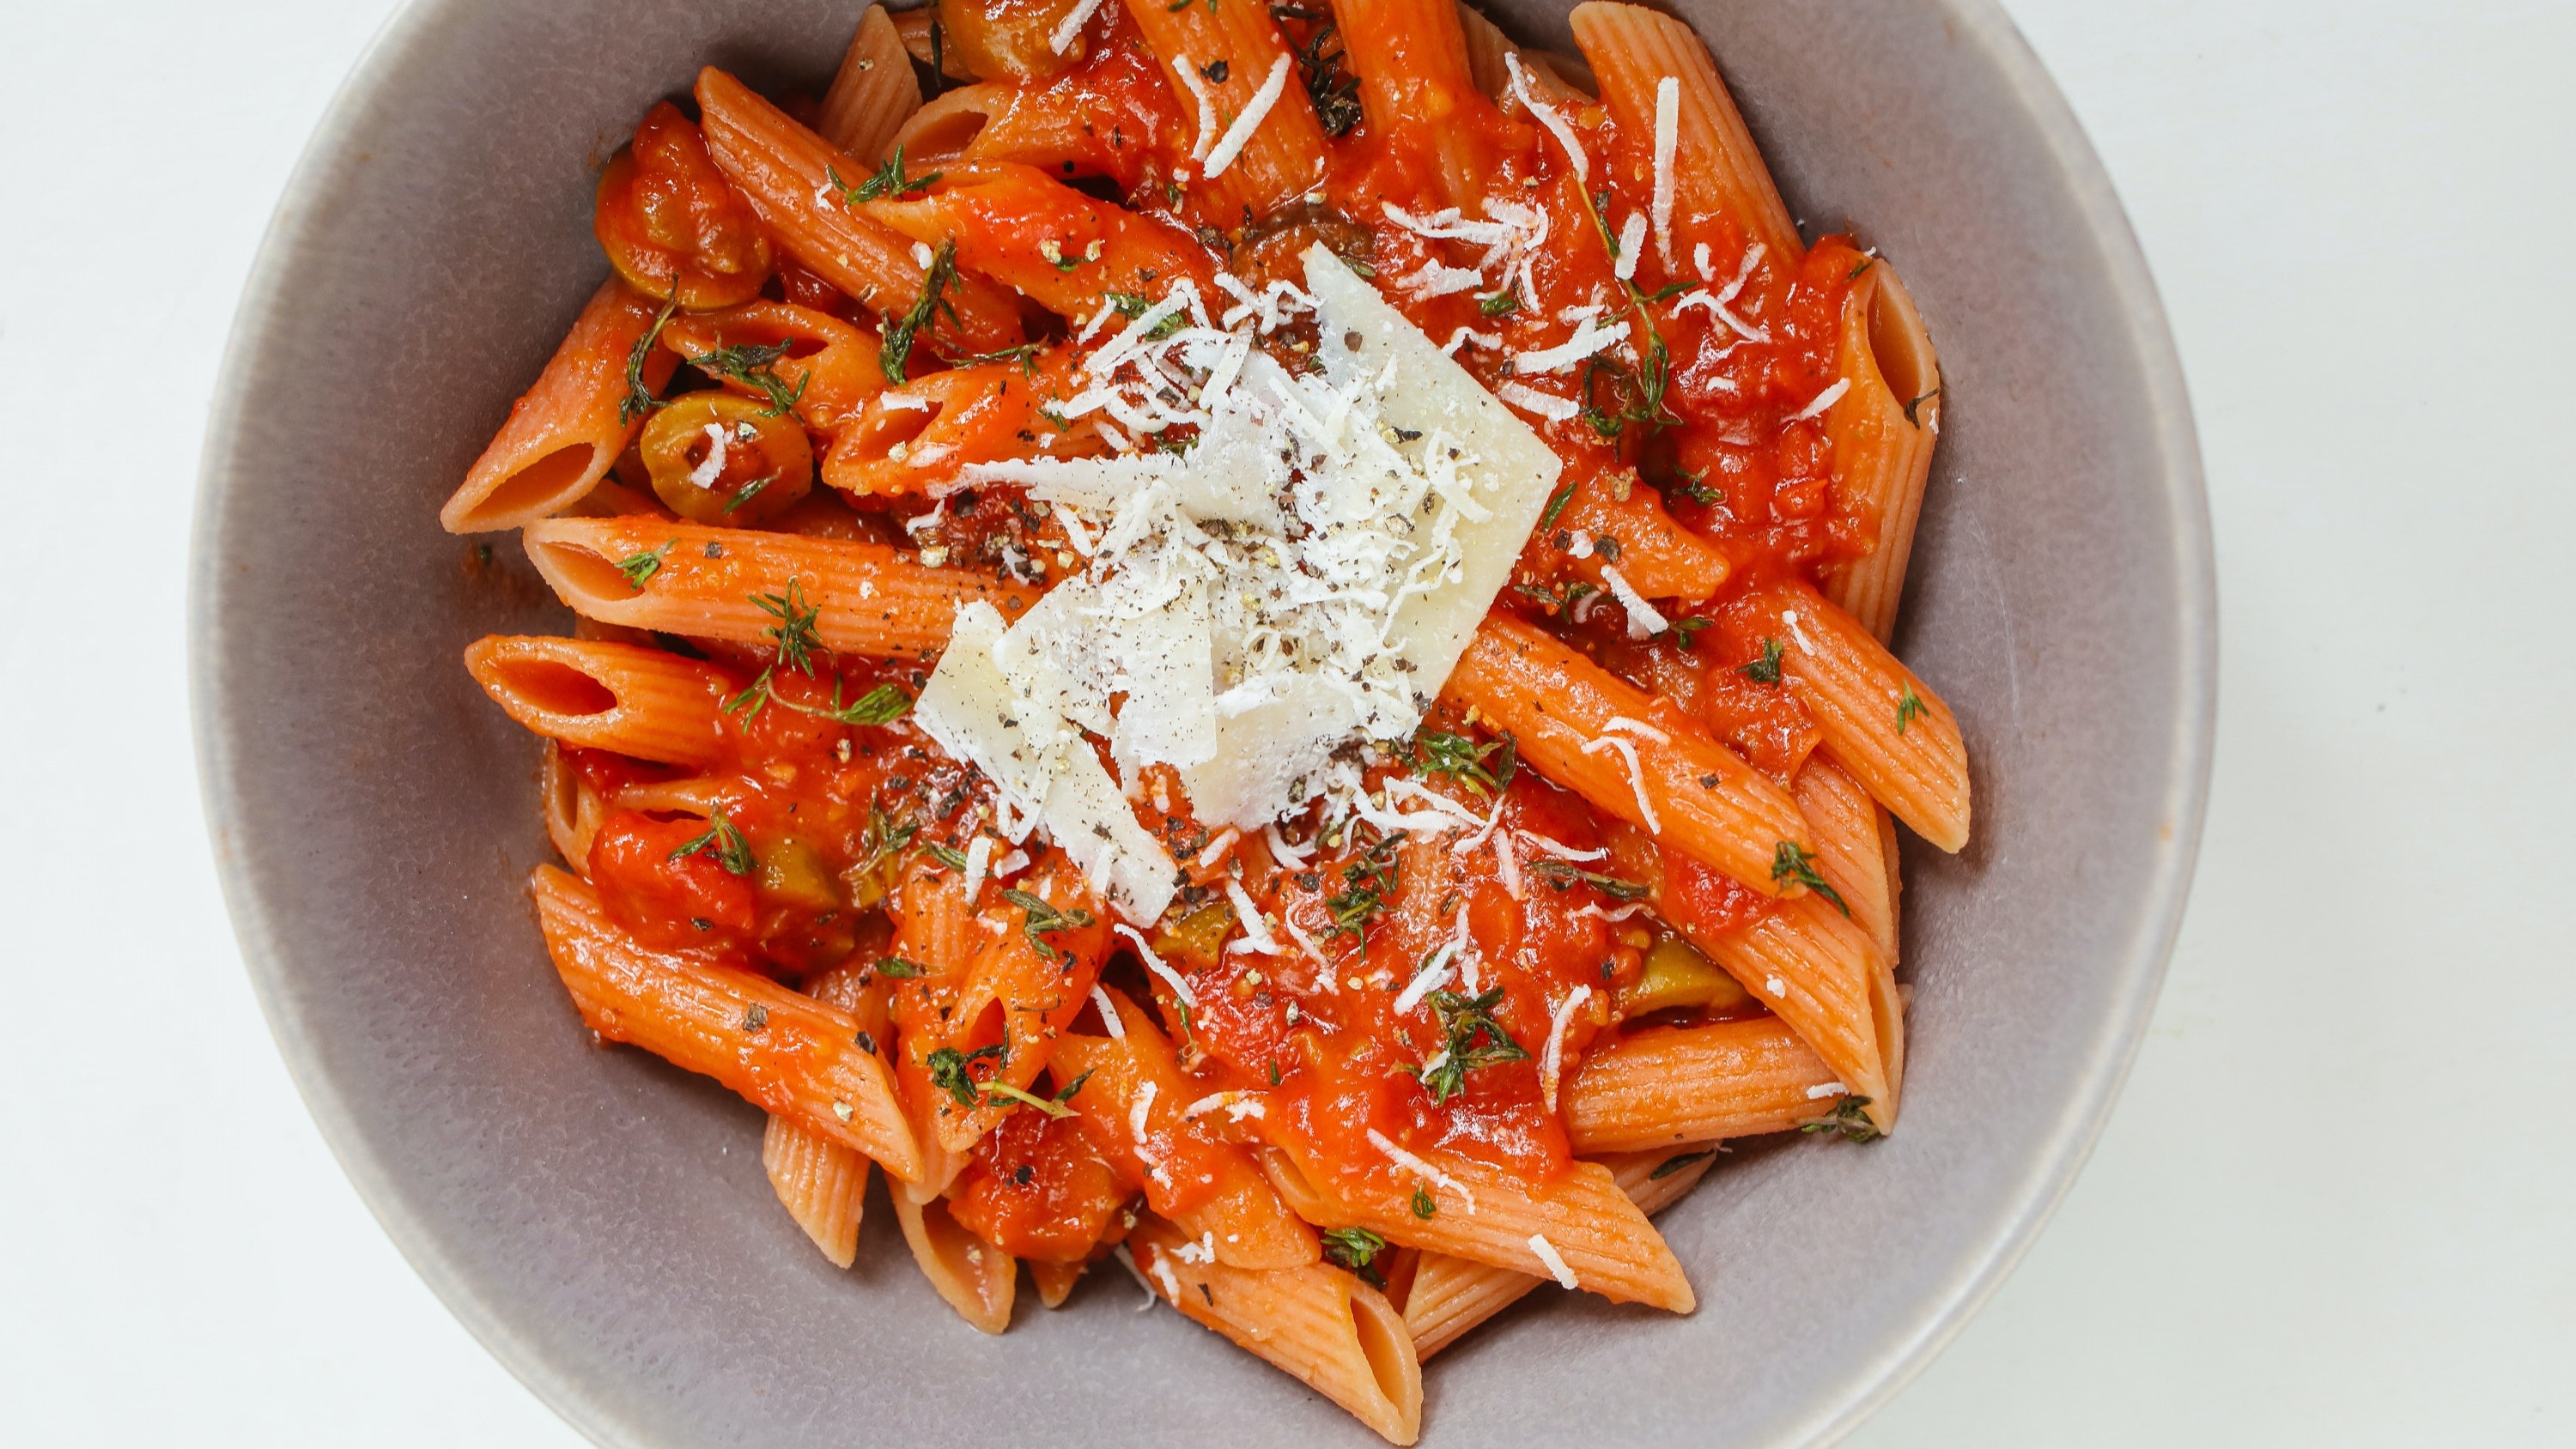 Penne pasta and tomato sauce